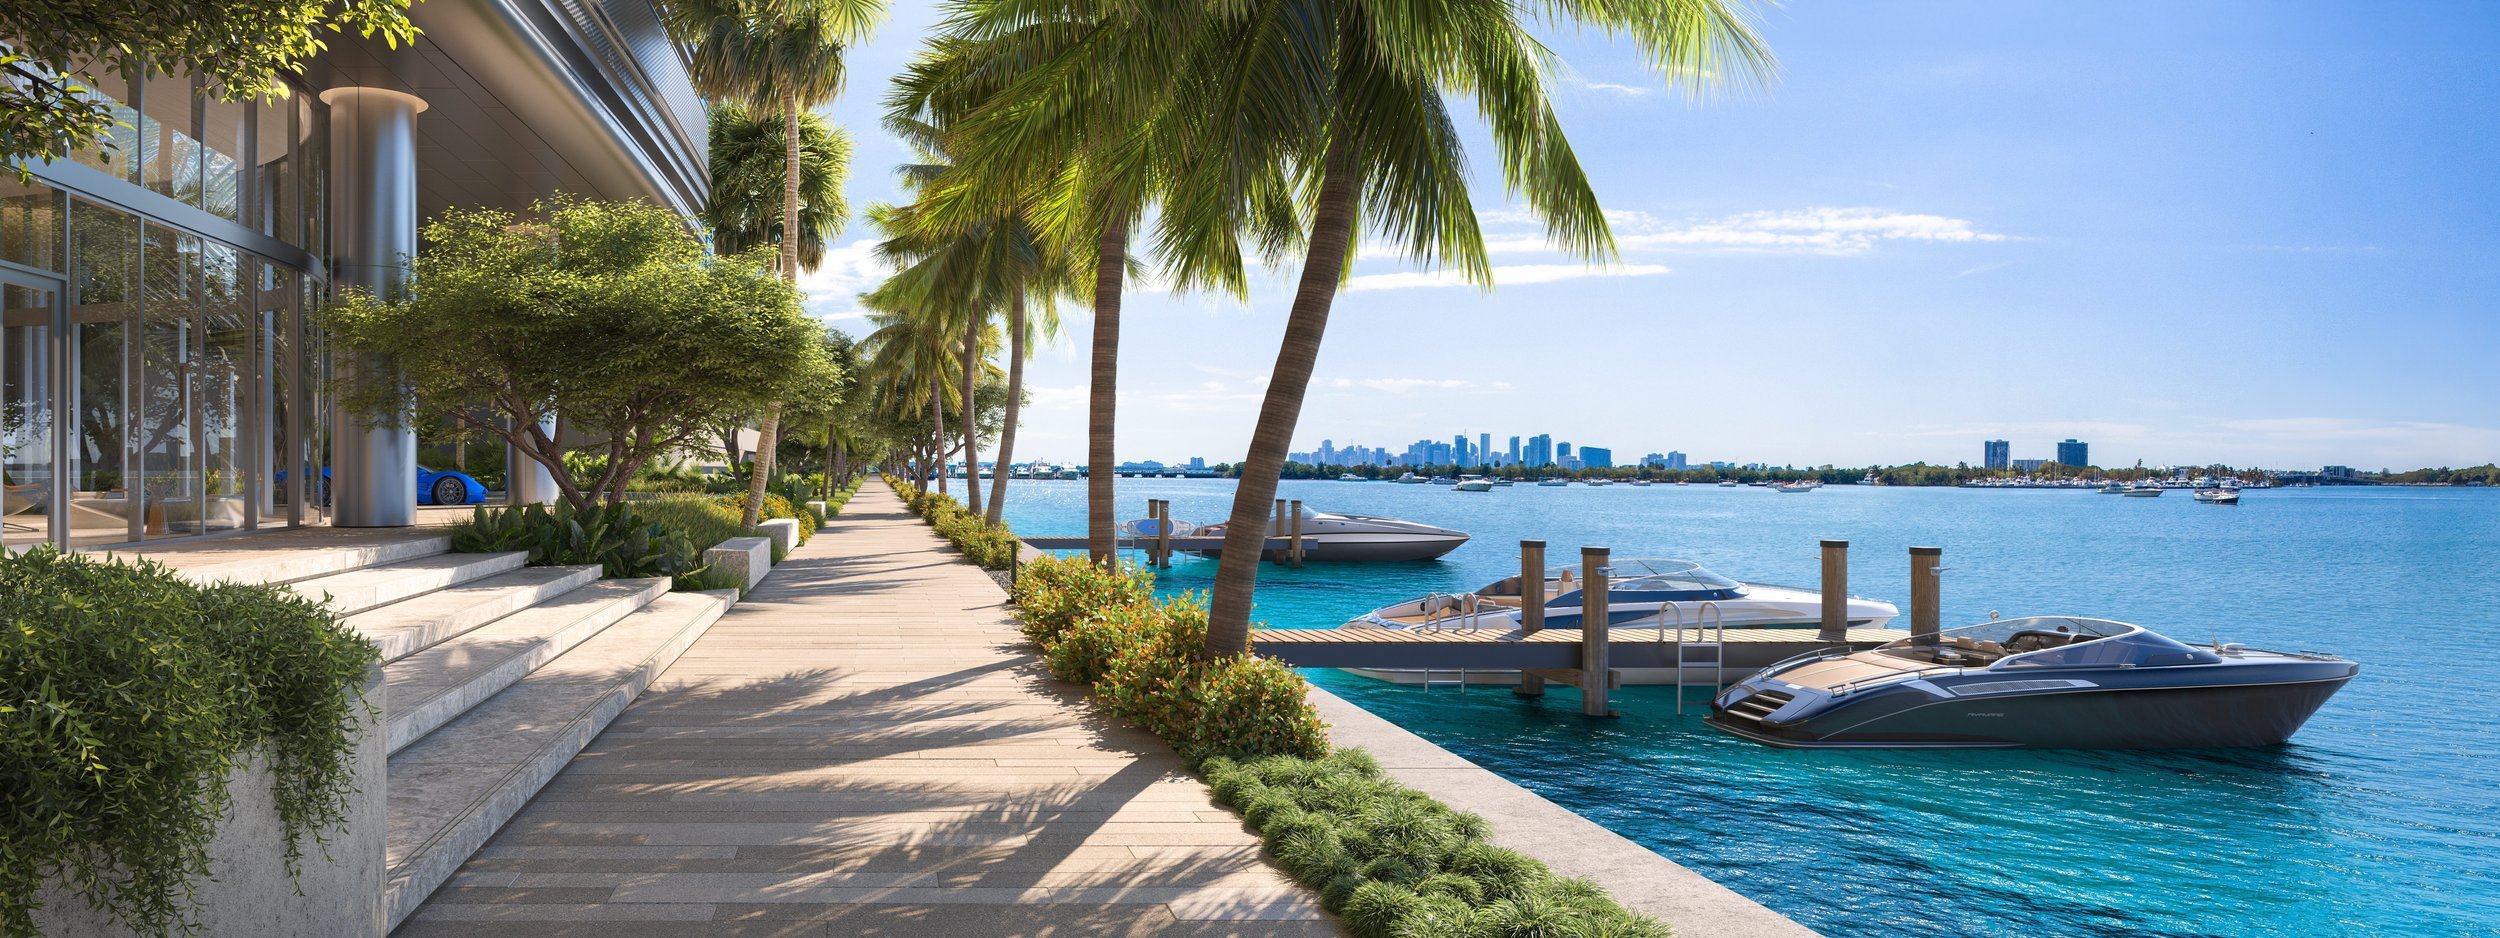 Pagani Residences Reveals First Look At Luxe Amenities on Miami's North Bay Village 445.jpg